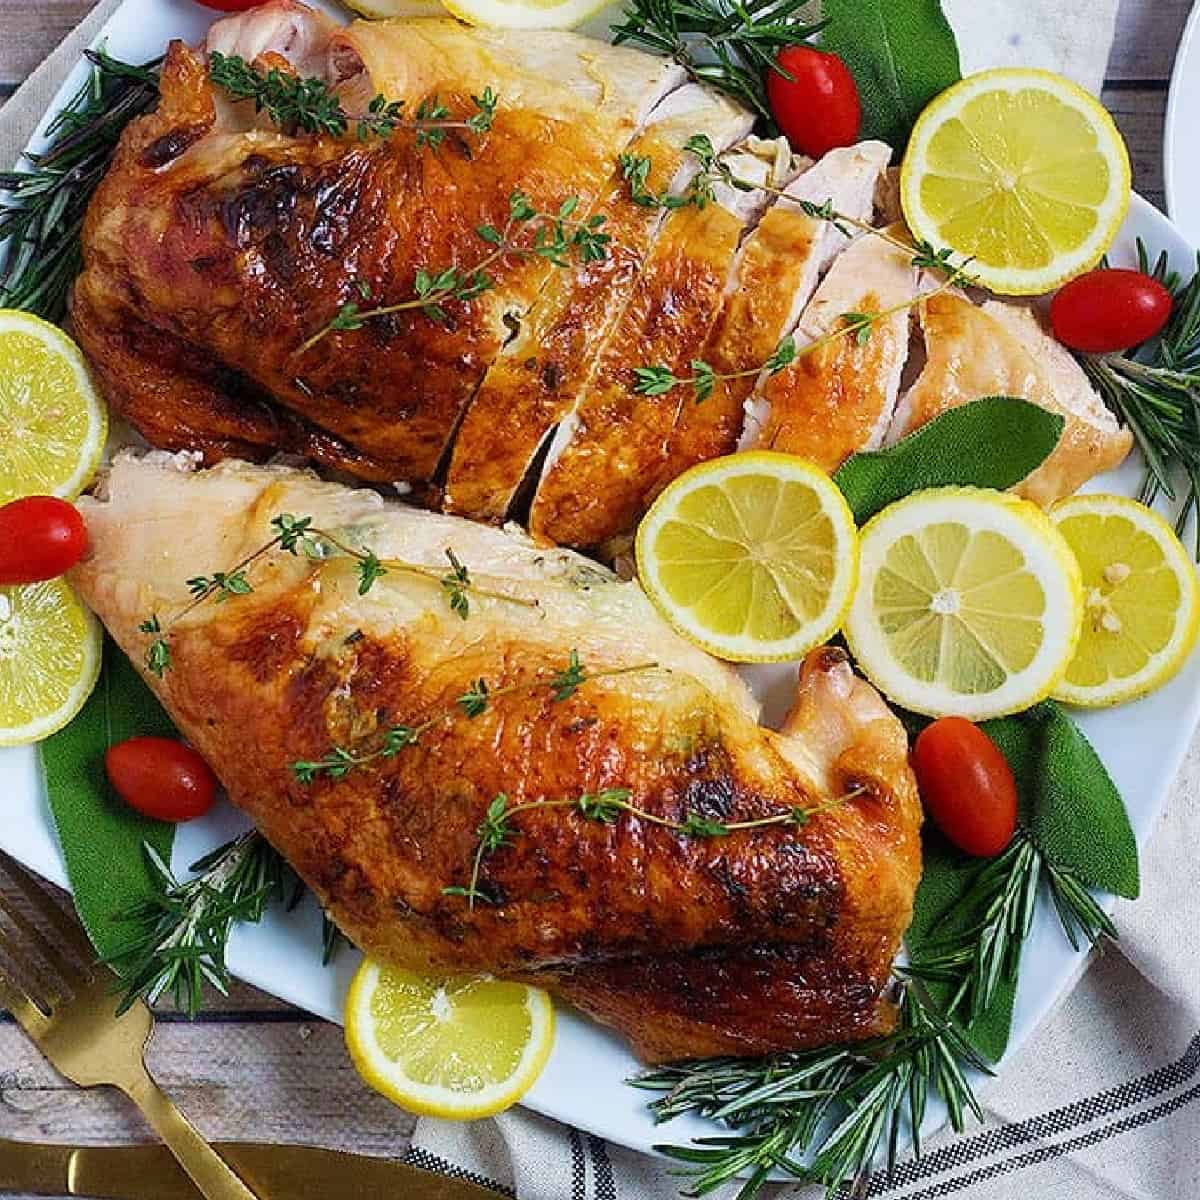 This herb roasted turkey breast recipe is perfect for a family dinner or your Thanksgiving table. The combination of herbs, butter and lemon results in a delicious and moist turkey breast.
